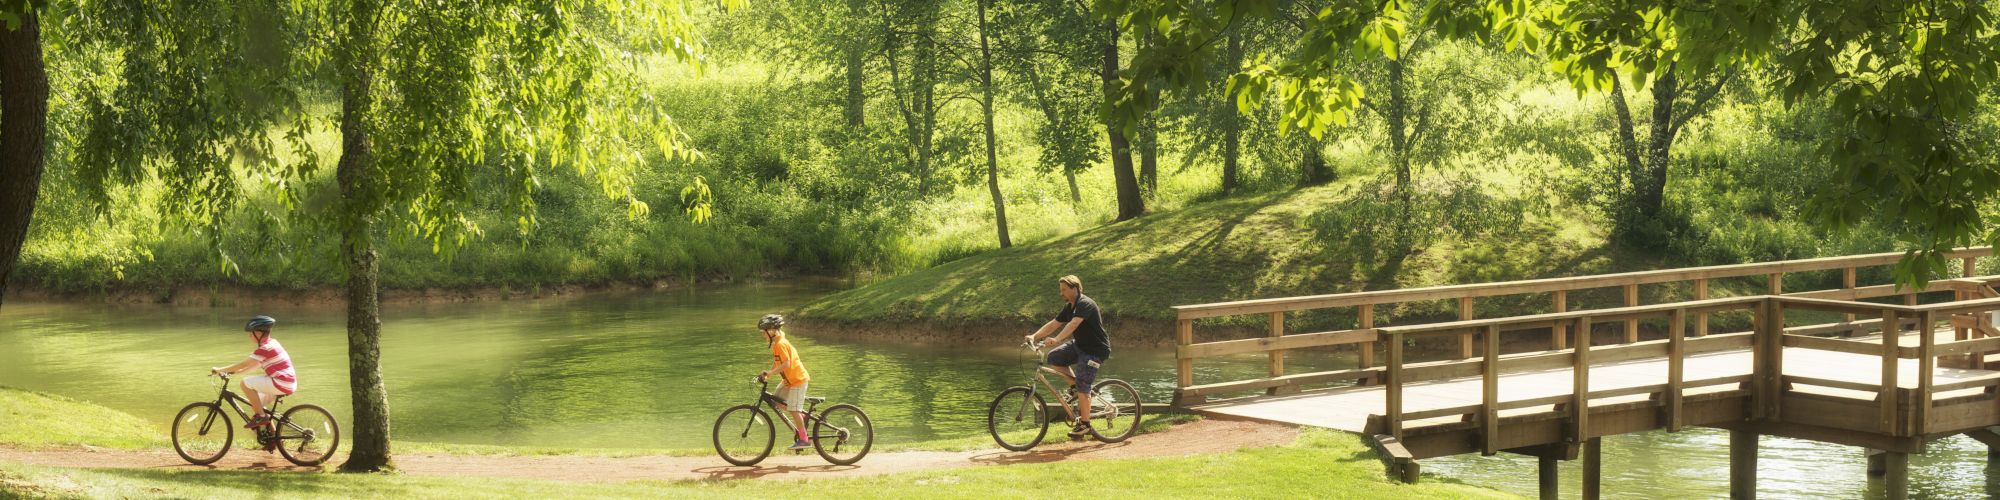 Three people are bicycling on a dirt path through a park with lush greenery and a wooden bridge over water in the background.